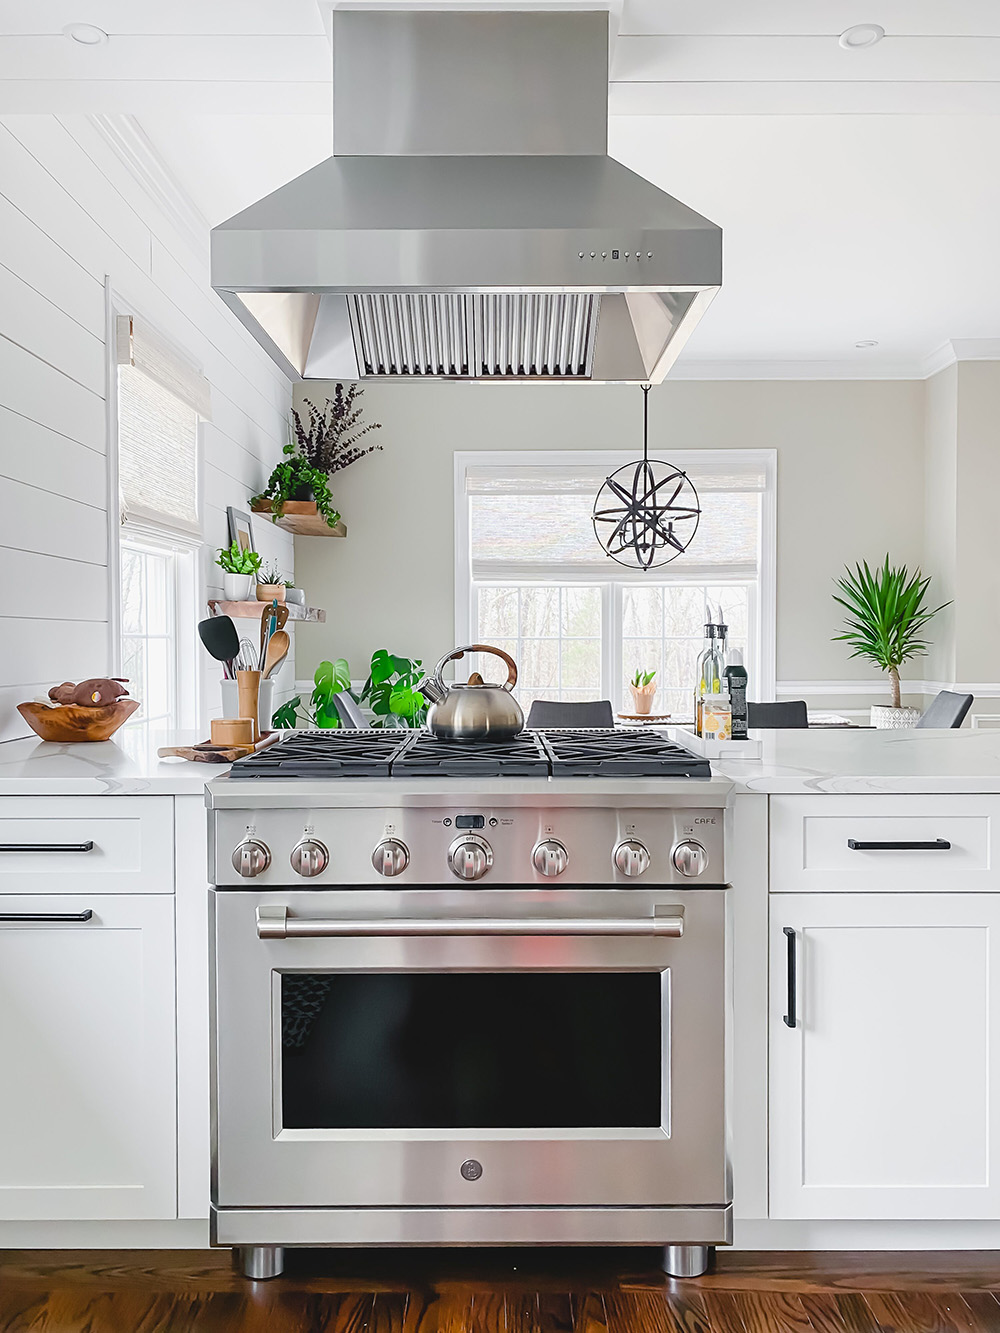 An open kitchen with a vent hood hanging over a gas oven.